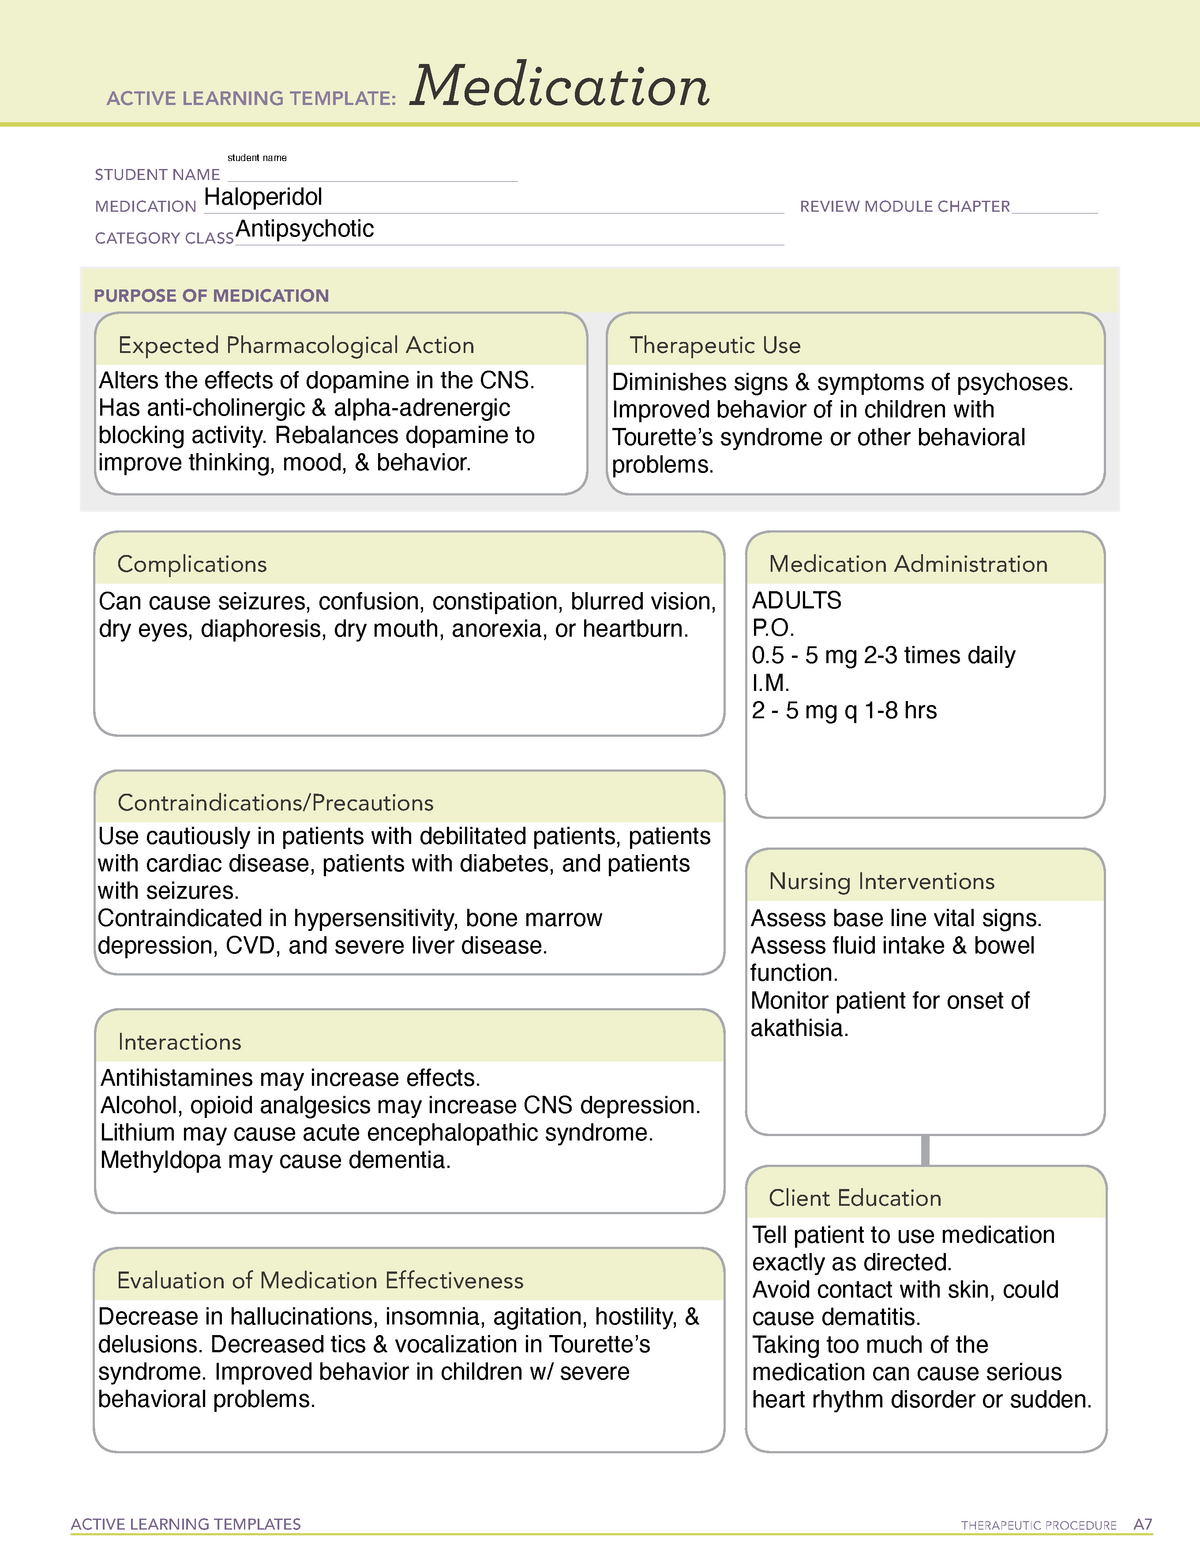 ATI Medication template Haloperidol clinical ACTIVE LEARNING